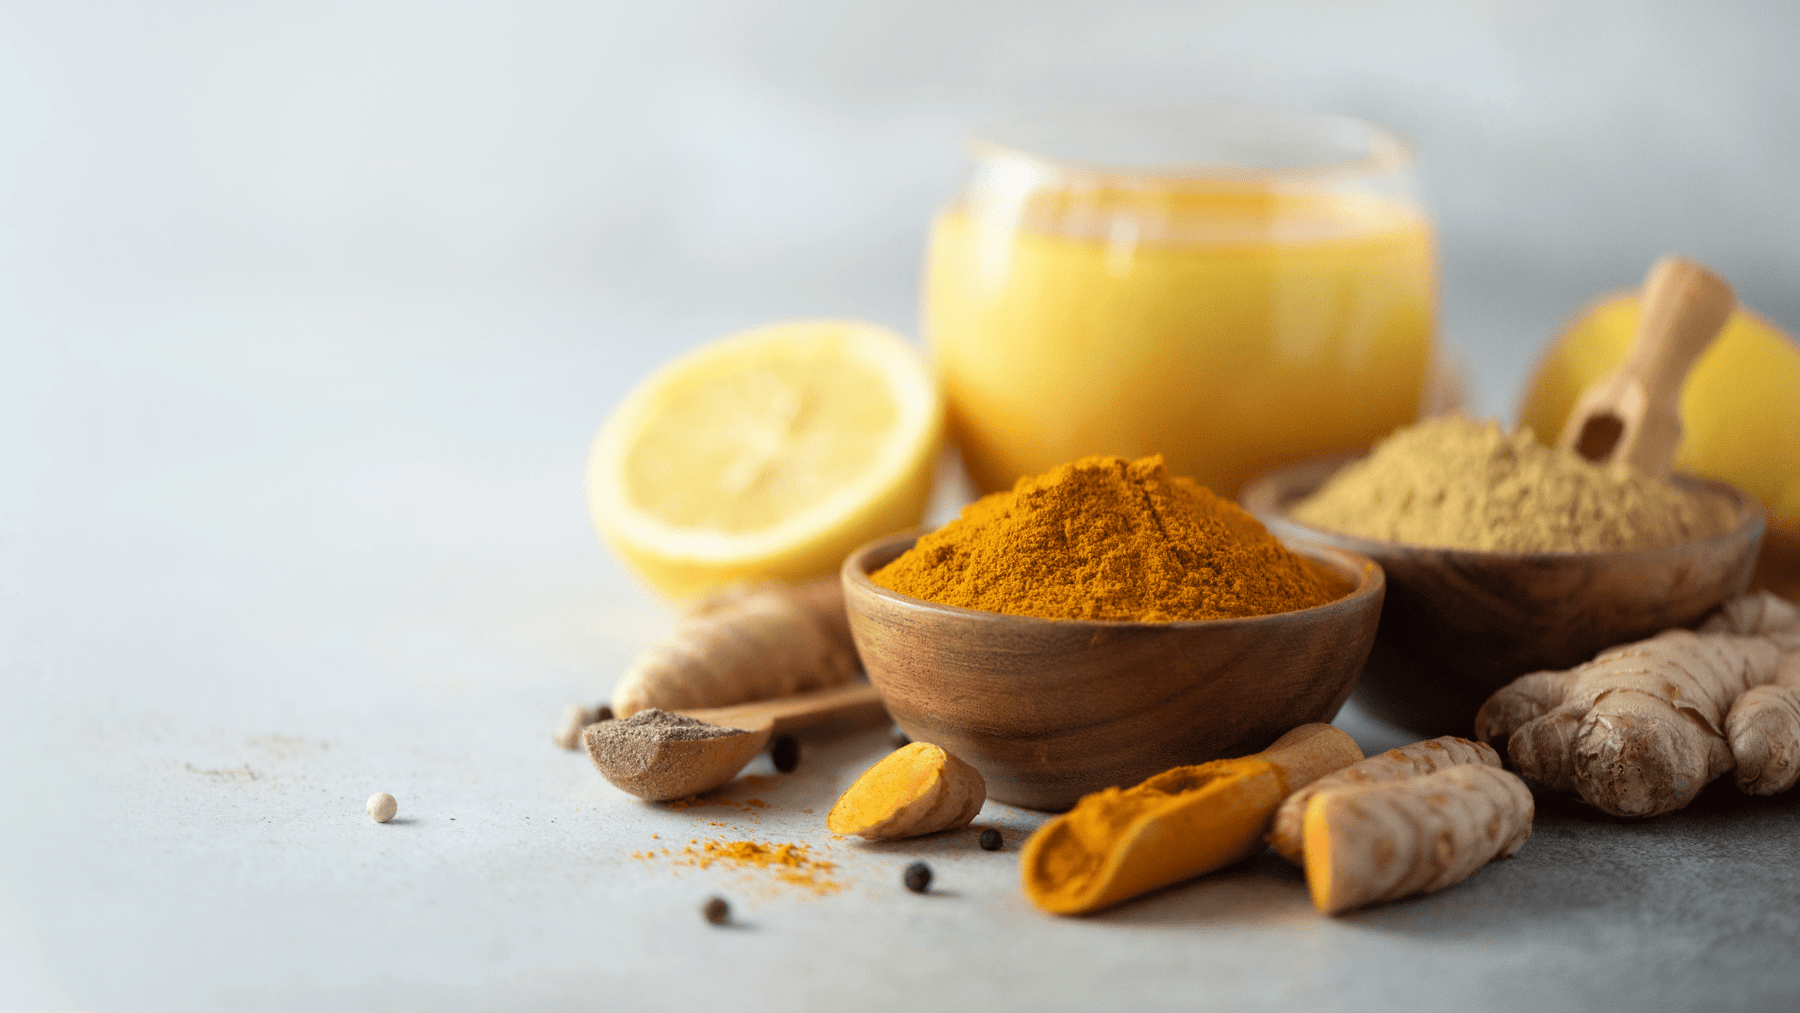 Is Turmeric Good For You? Benefits & Side Effects